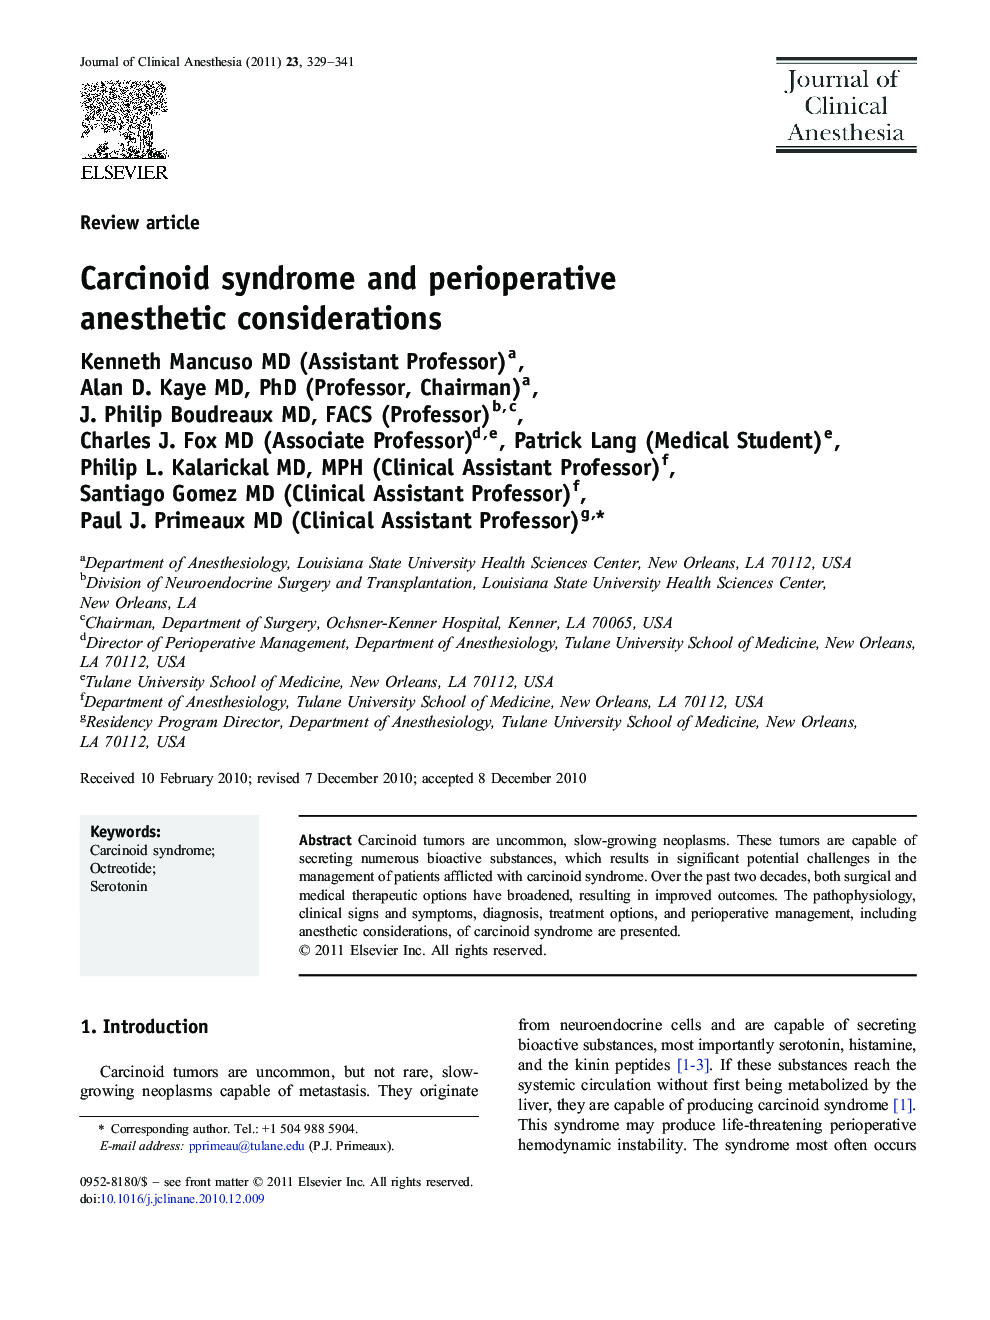 Carcinoid syndrome and perioperative anesthetic considerations